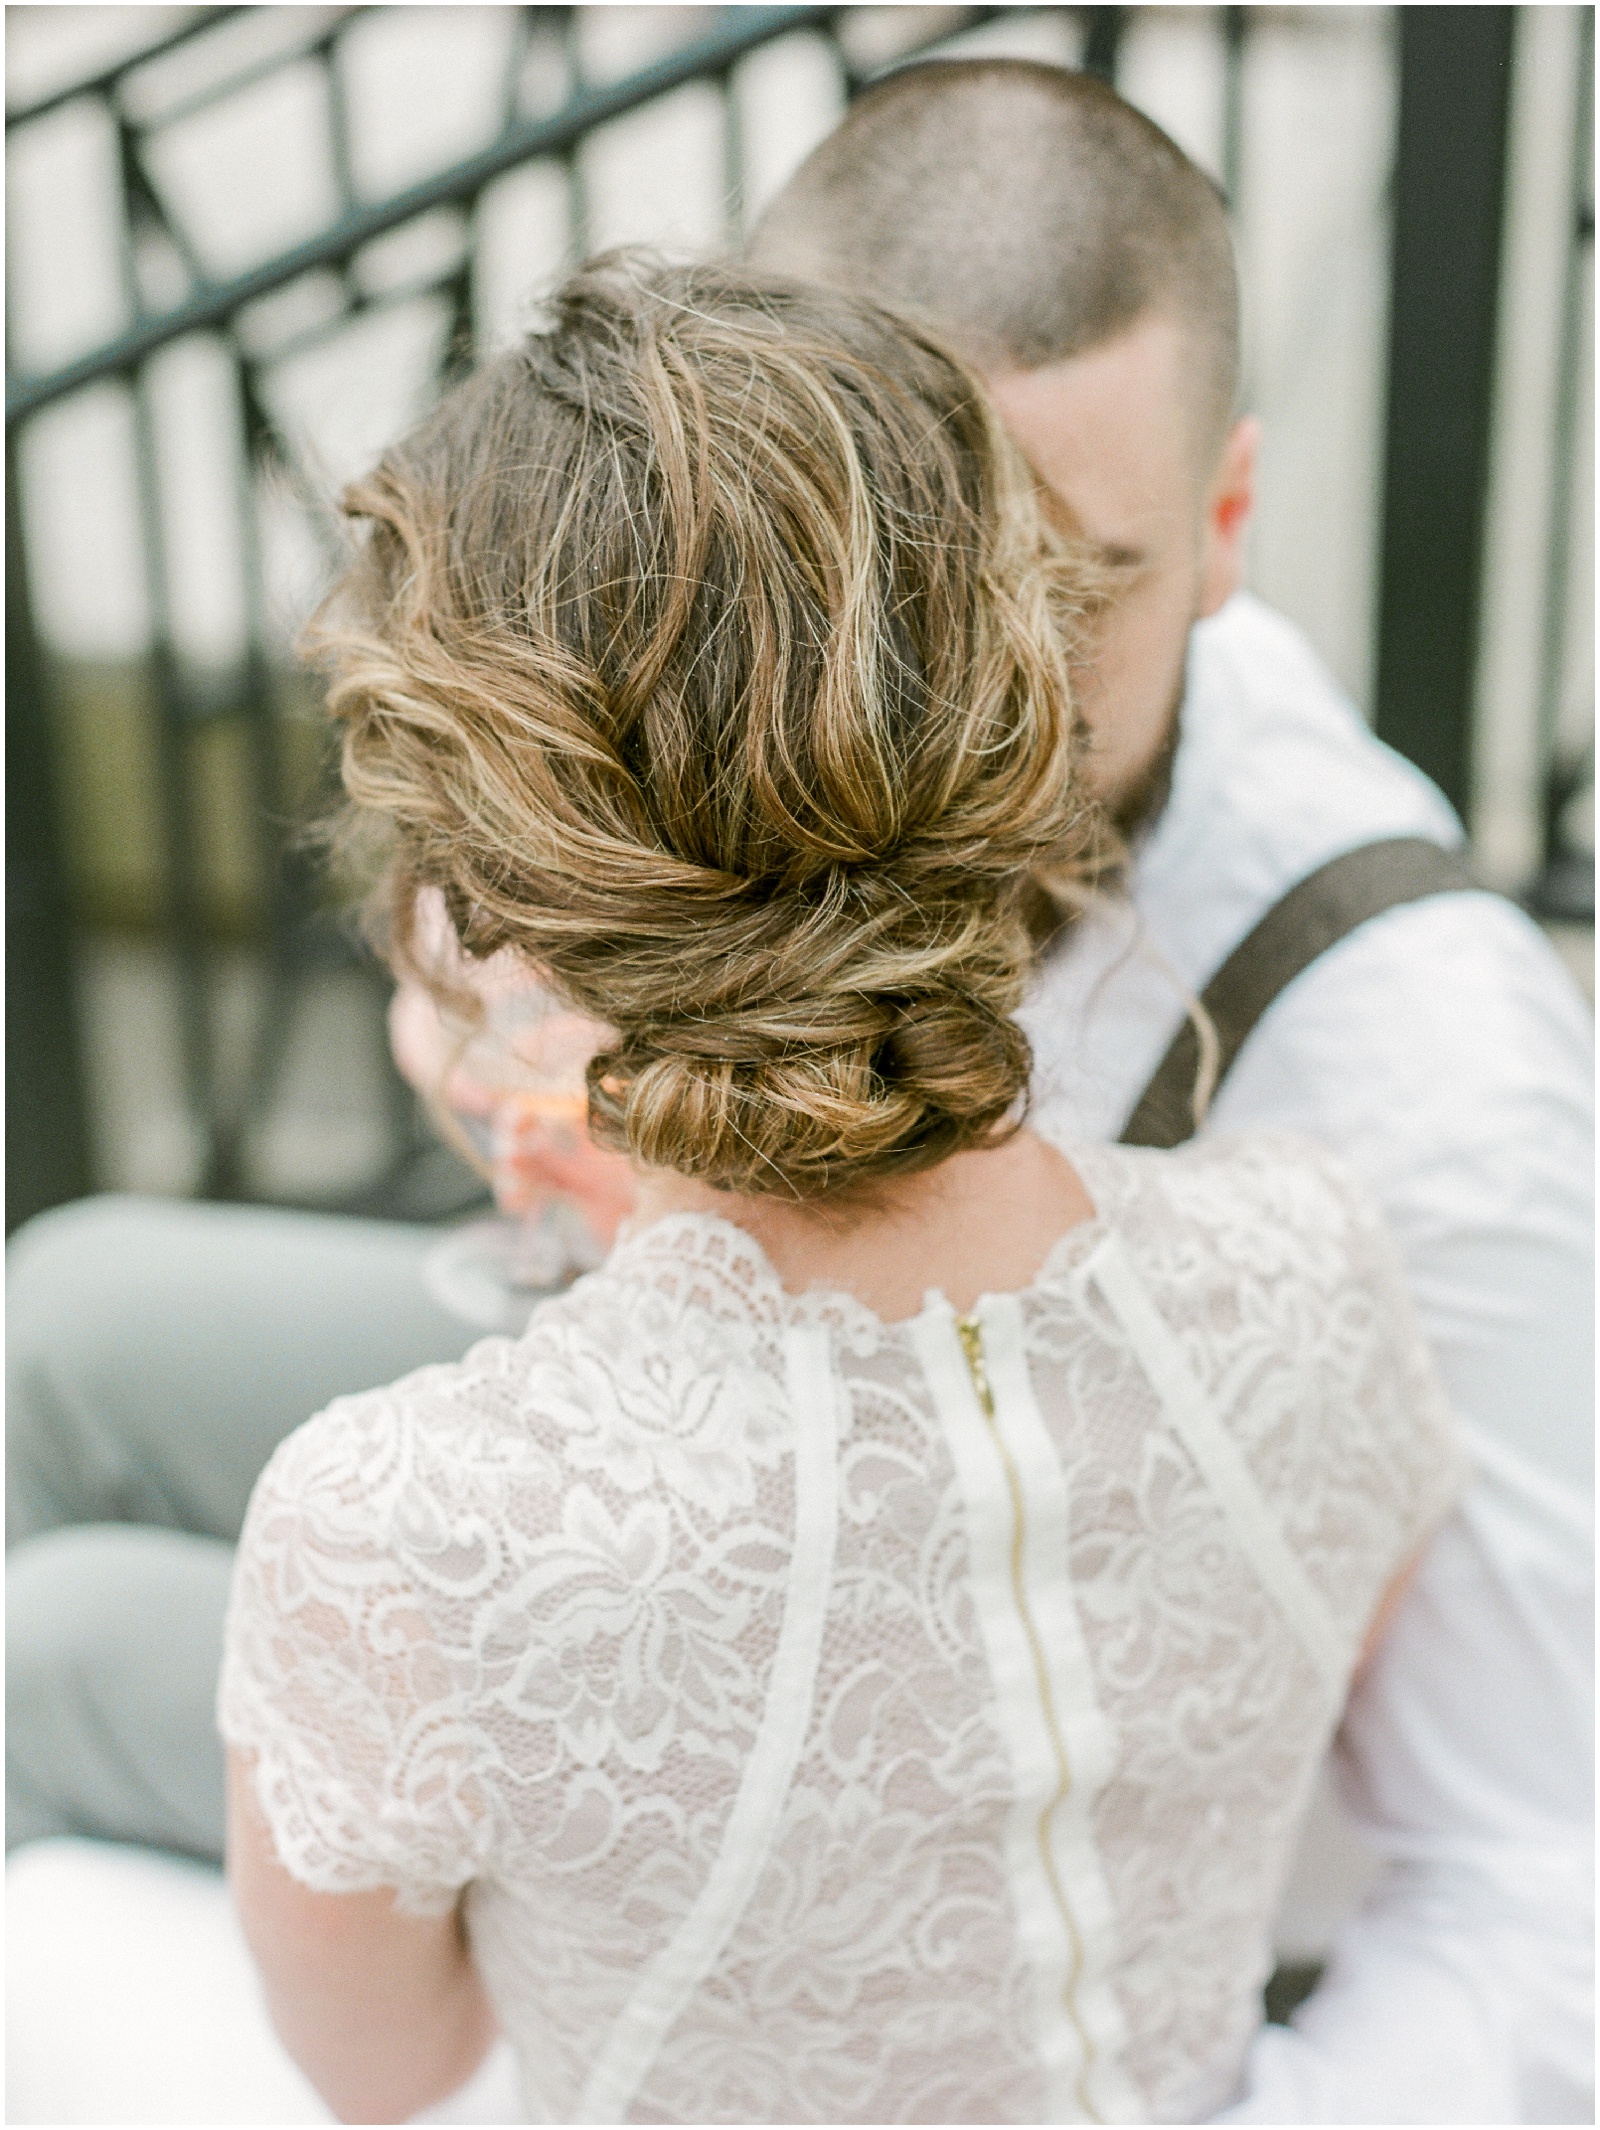 Lace wedding gown romantic updo